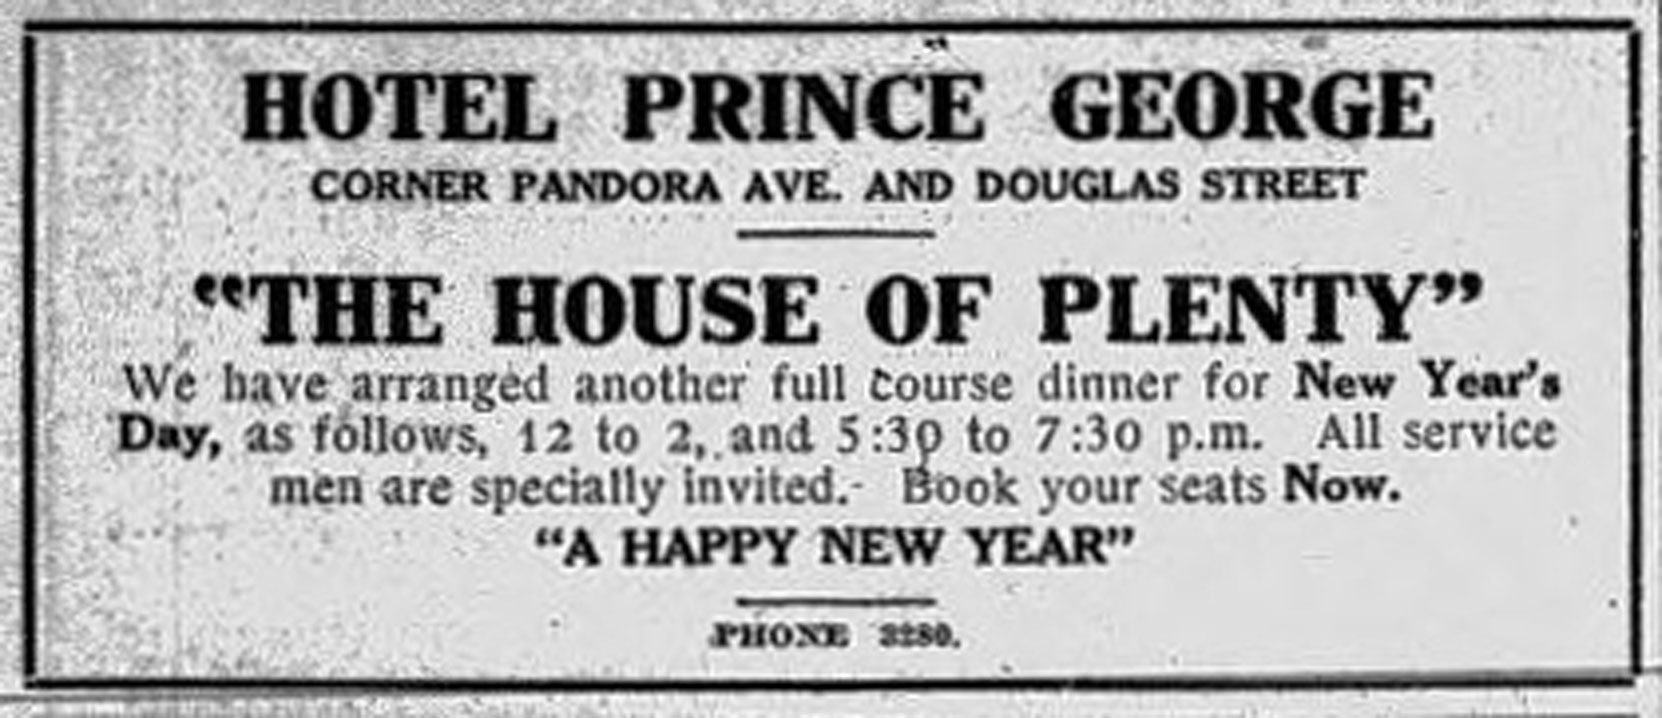 1915 advertisement for the Hotel Prince George, now the Rialto Hotel, 1450 Douglas Street. (Victoria Online Sightseeing Tours collection)